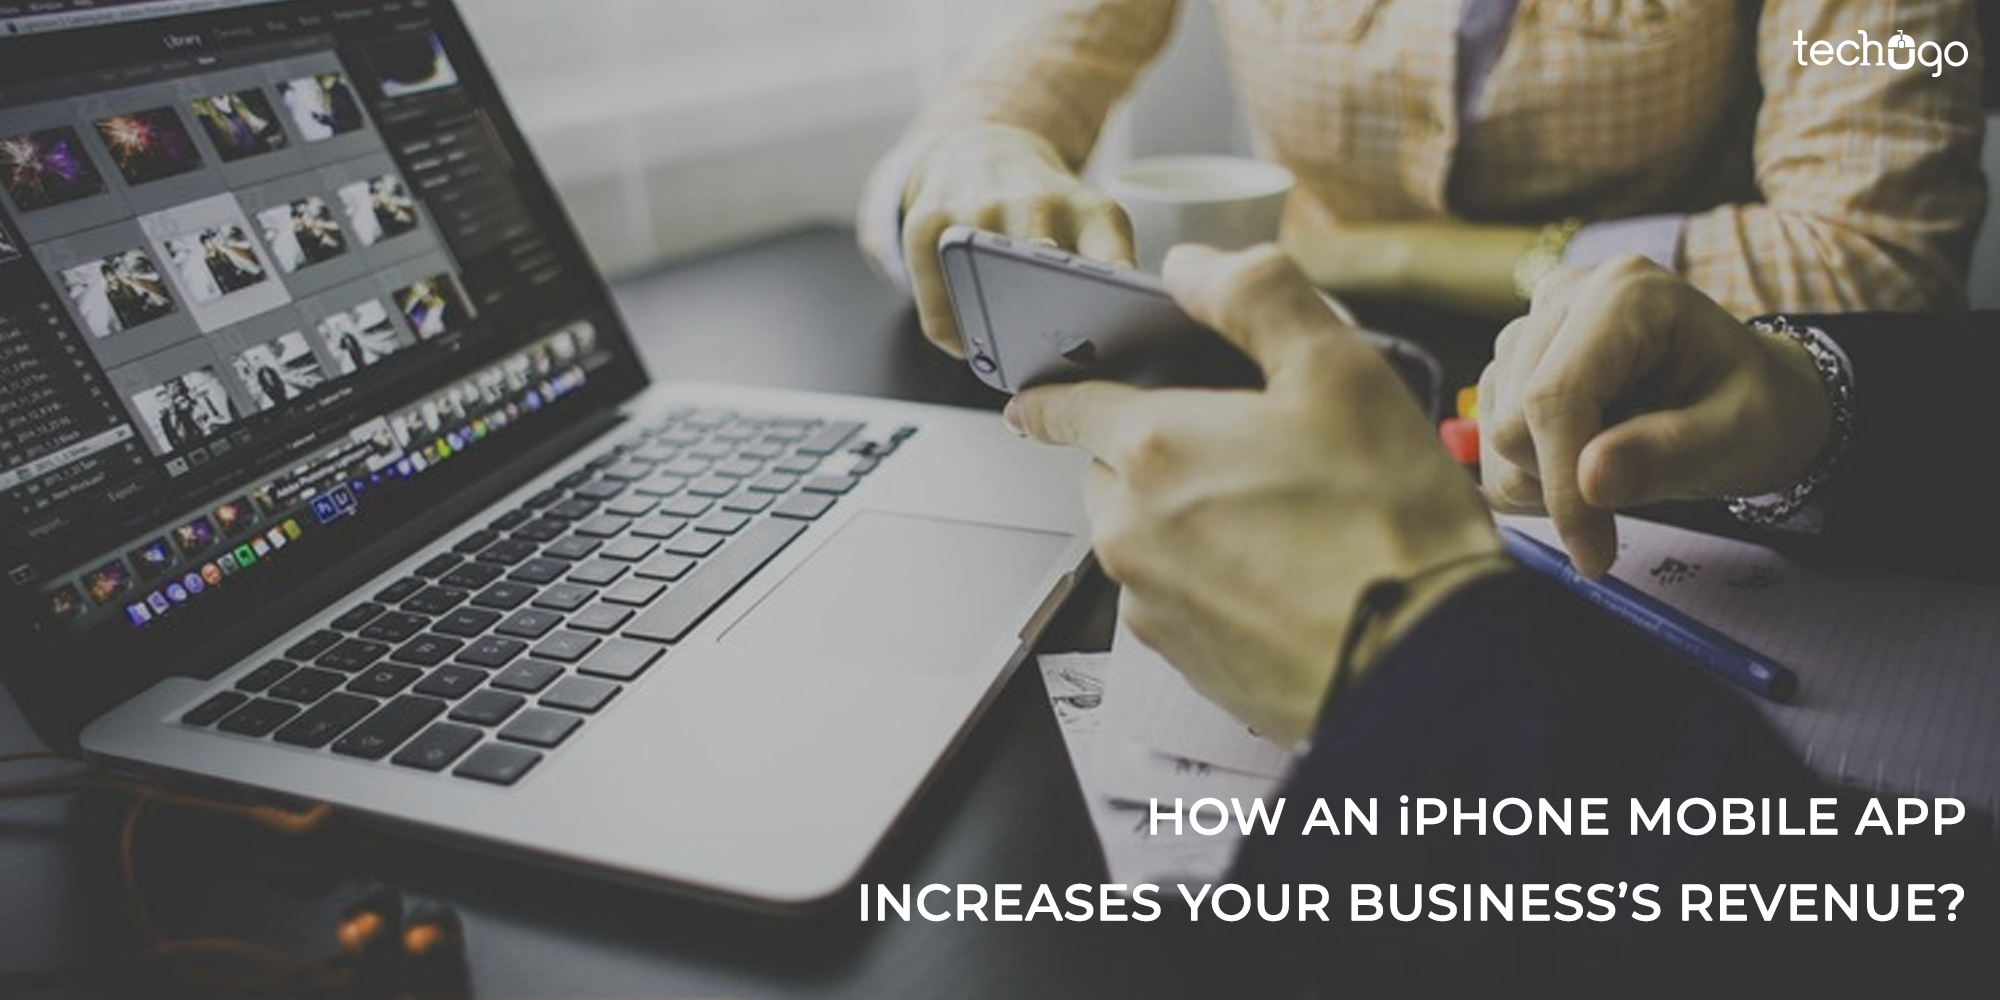 How An iPhone Mobile App Increases Your Business’s Revenue?